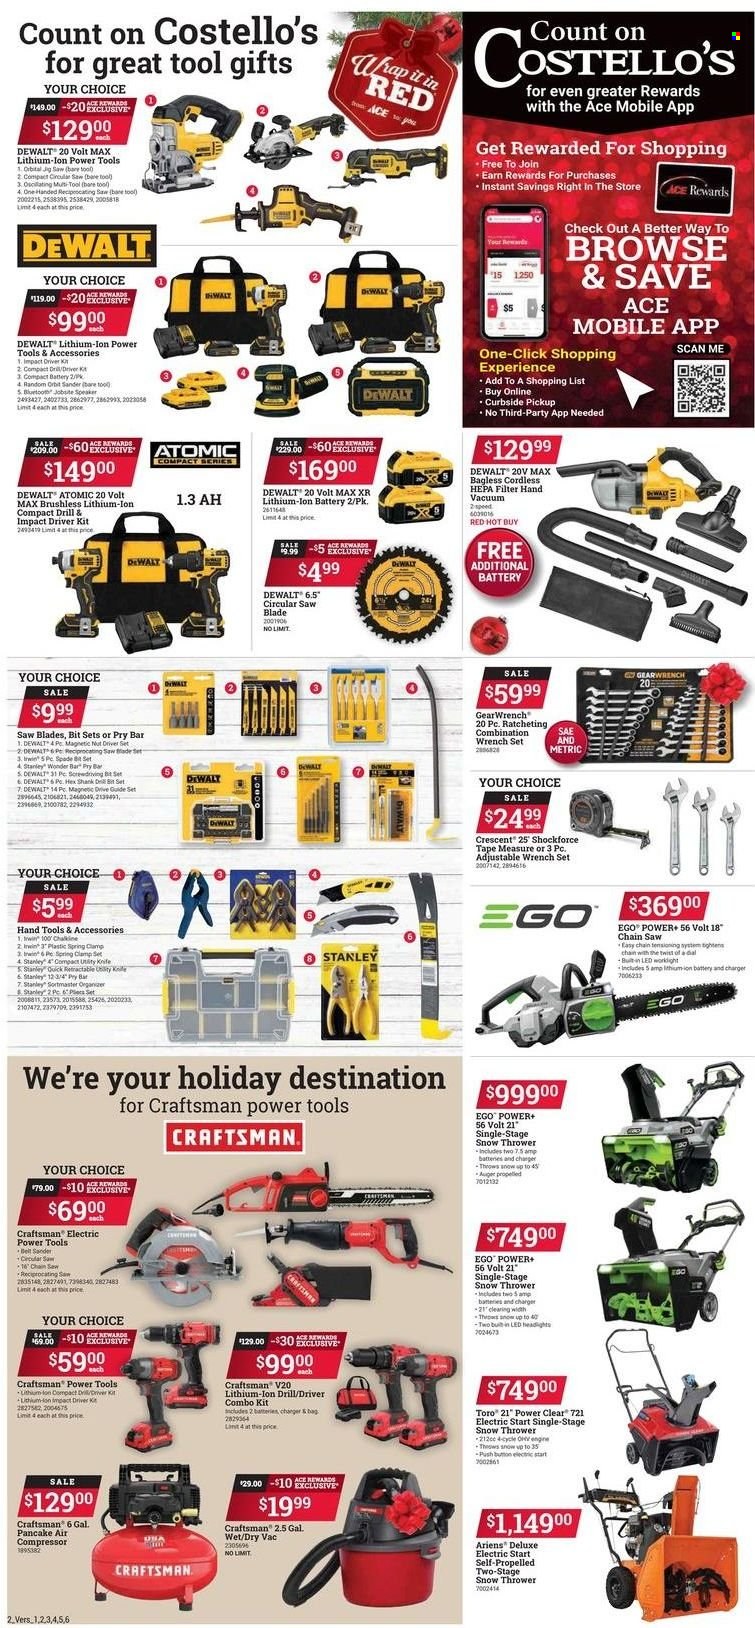 thumbnail - ACE Hardware Flyer - 12/01/2022 - 12/24/2022 - Sales products - tools & accessories, Orbit, Ego, knife, vacuum cleaner, Thrower, Stanley, DeWALT, impact driver, power tools, Craftsman, circular saw blade, random orbit sander, chain saw, circular saw, jig saw, belt sander, reciprocating saw blade, pry bar, combo kit, wrench set, spade, hand tools, air compressor, measuring tape. Page 2.